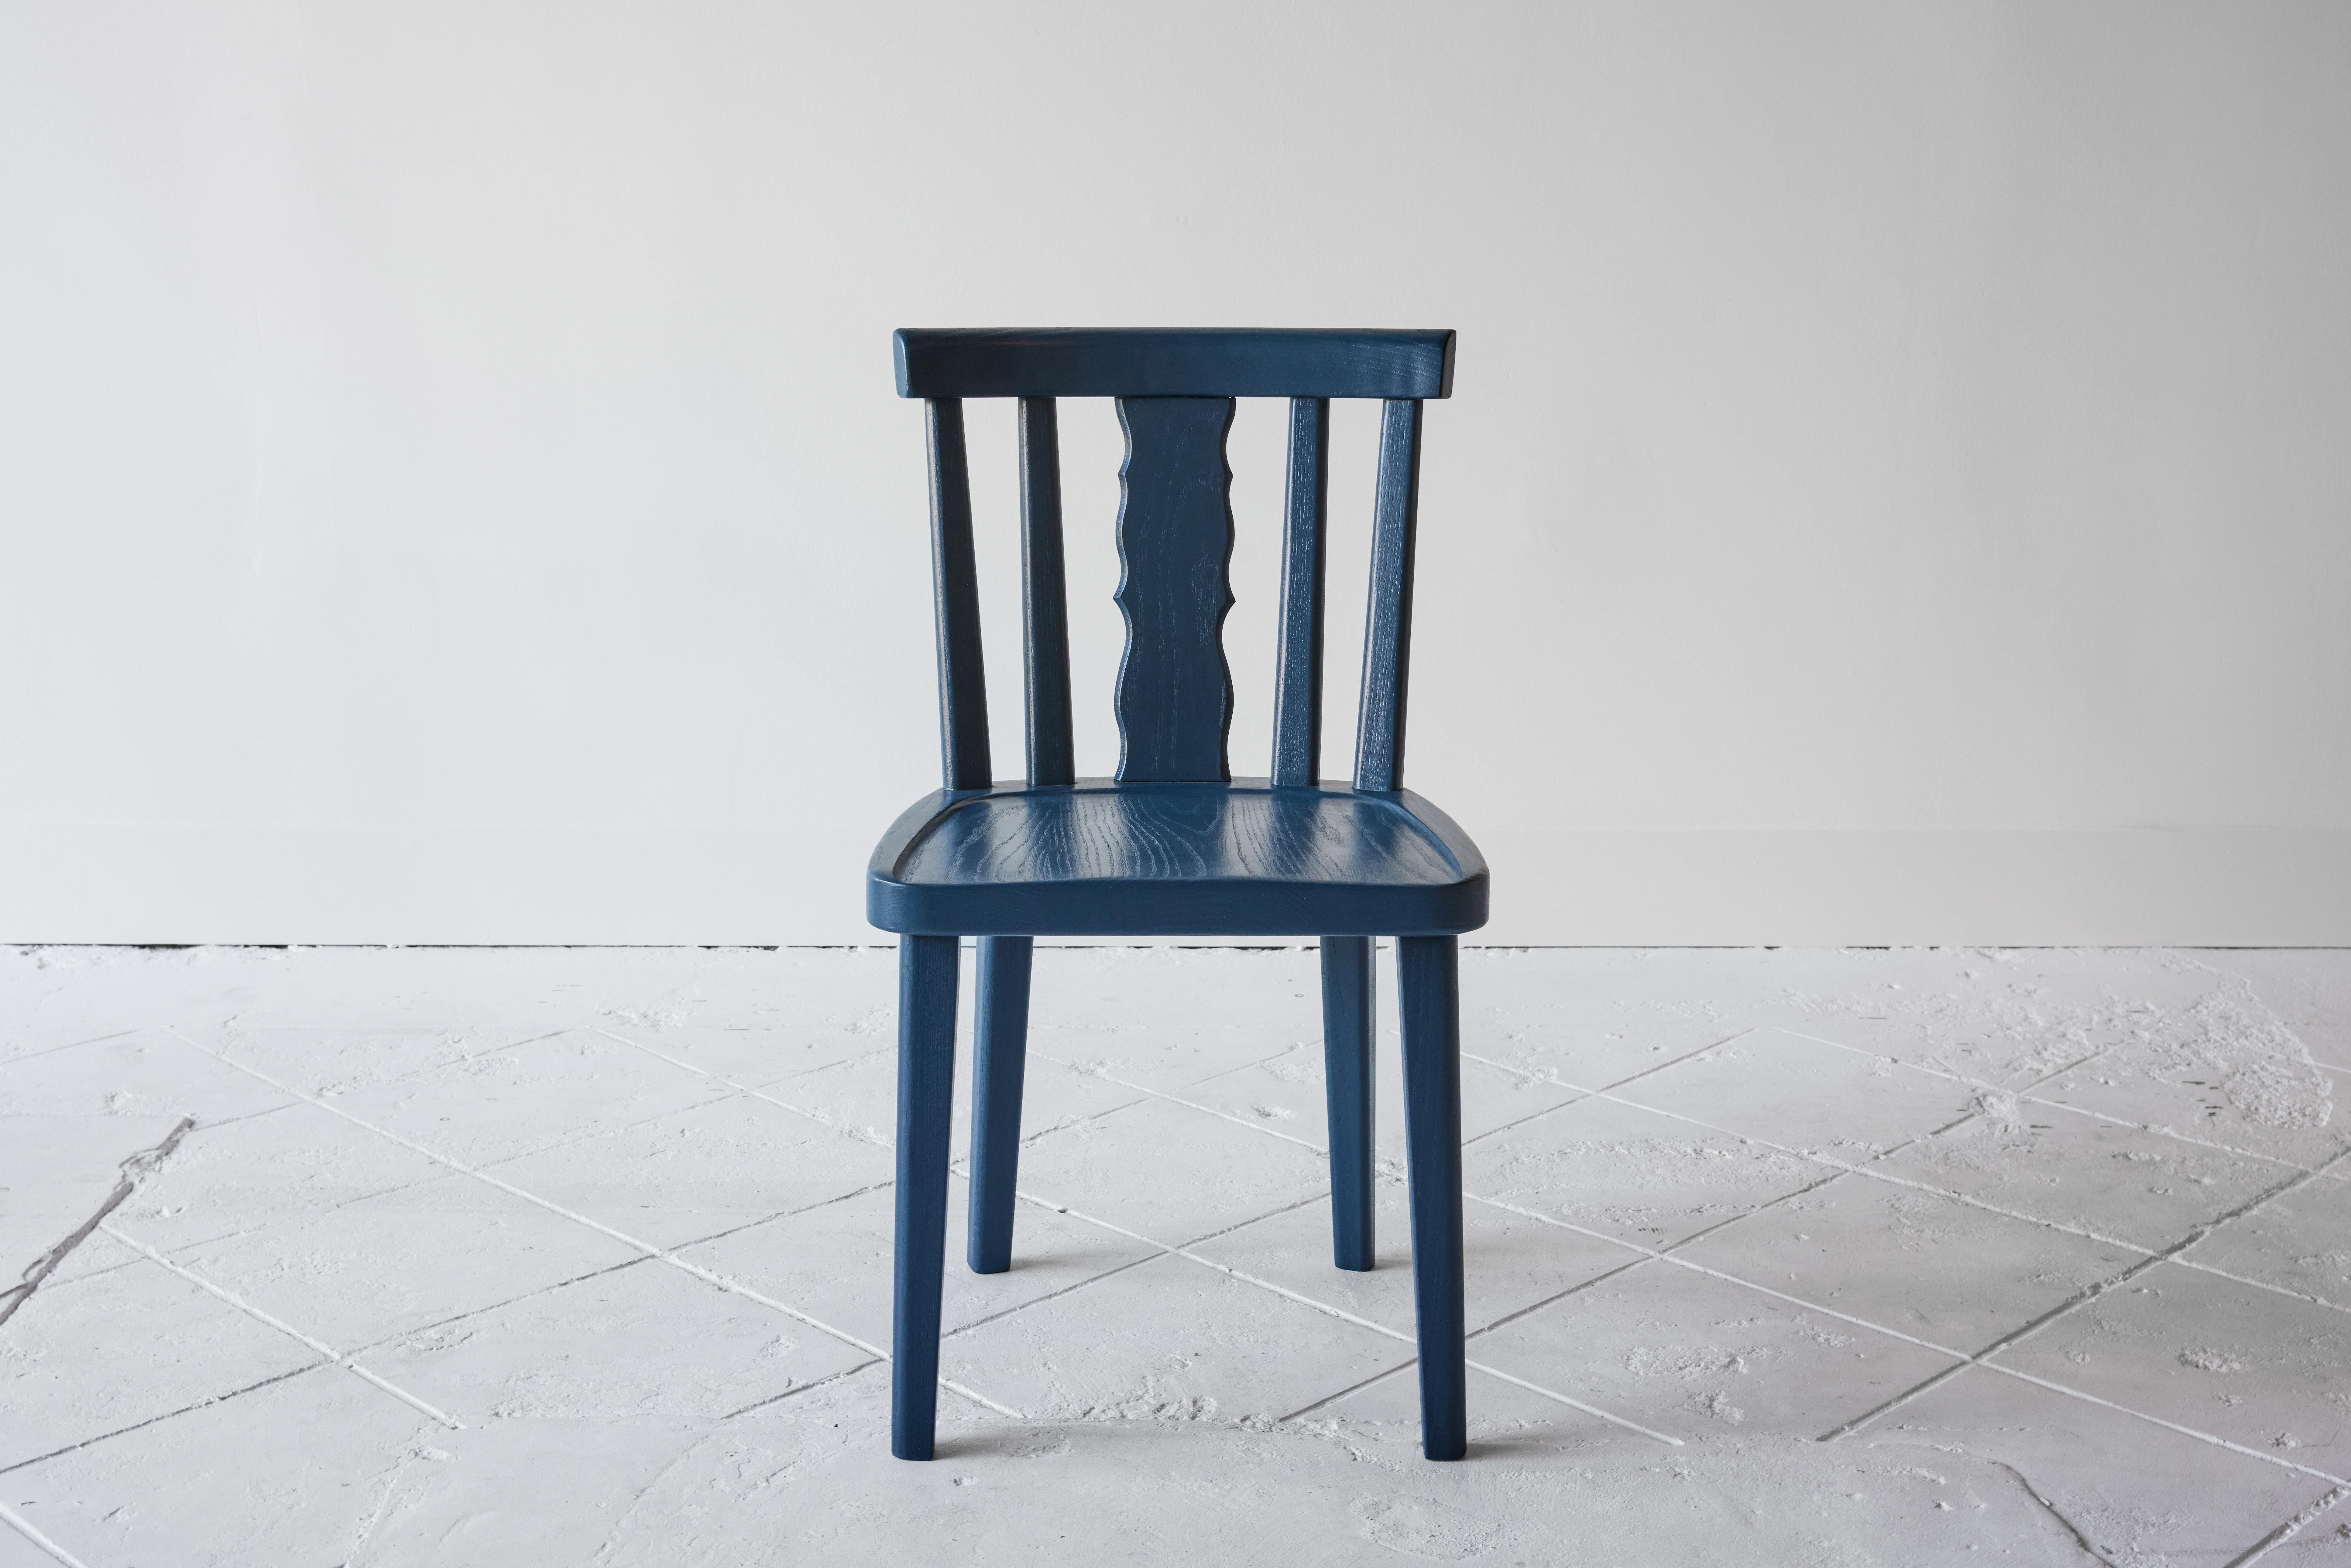 This comfortable dining chair boasts an open silhouette inspired by rustic European style that is both spectacularly simple and elegantly detailed. Handcrafted in Douglas fir and painted in our signature blue. Set of four.